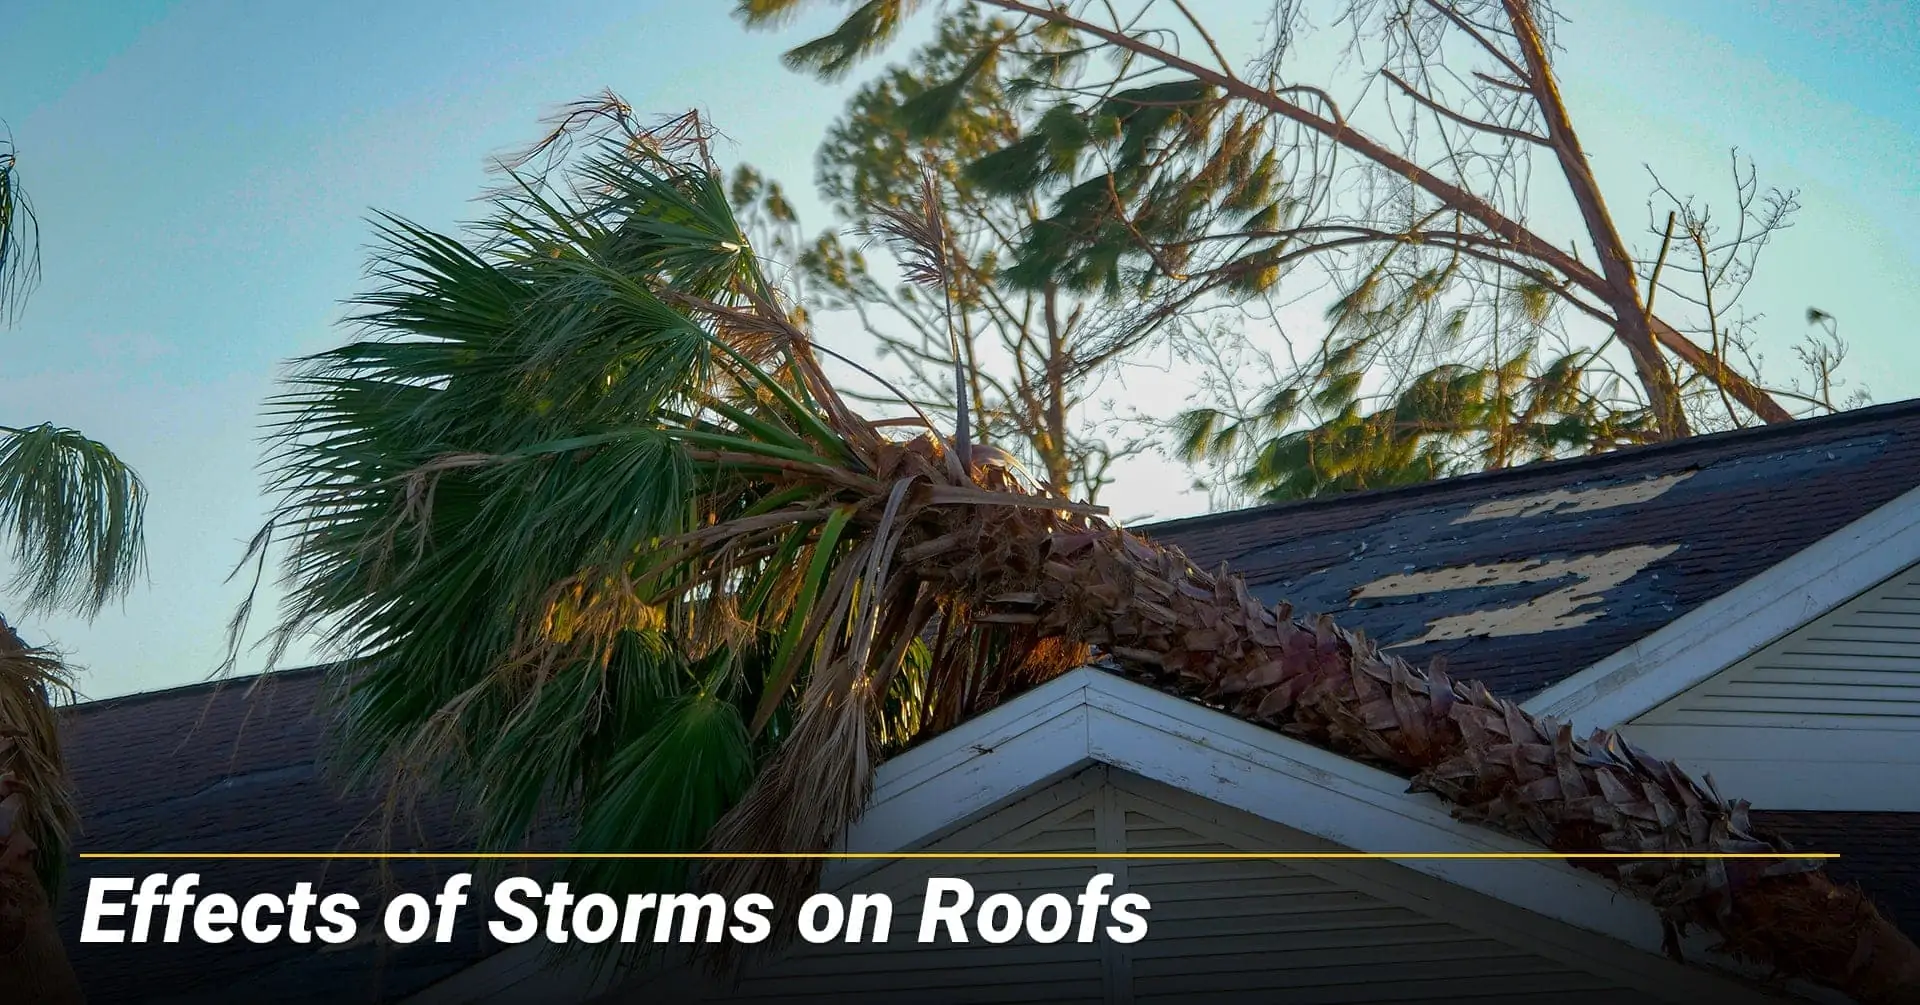 Effects of Storms on Roofs, storm can cause damage to your roof